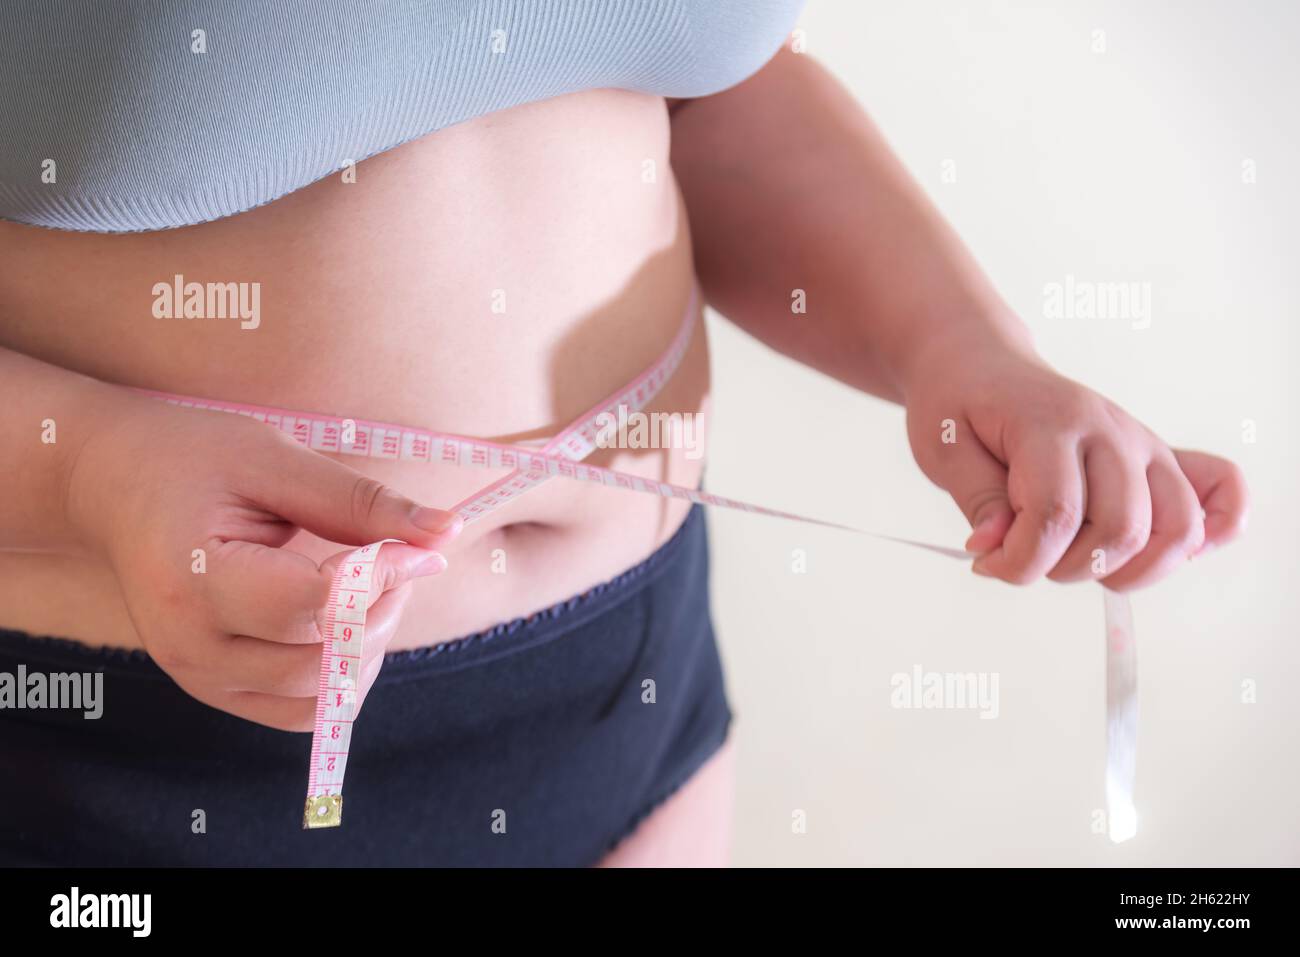 Fat women., Belly women Overweight, Shape up healthy stomach muscle, and diet lifestyle, to reduce belly concept. Stock Photo